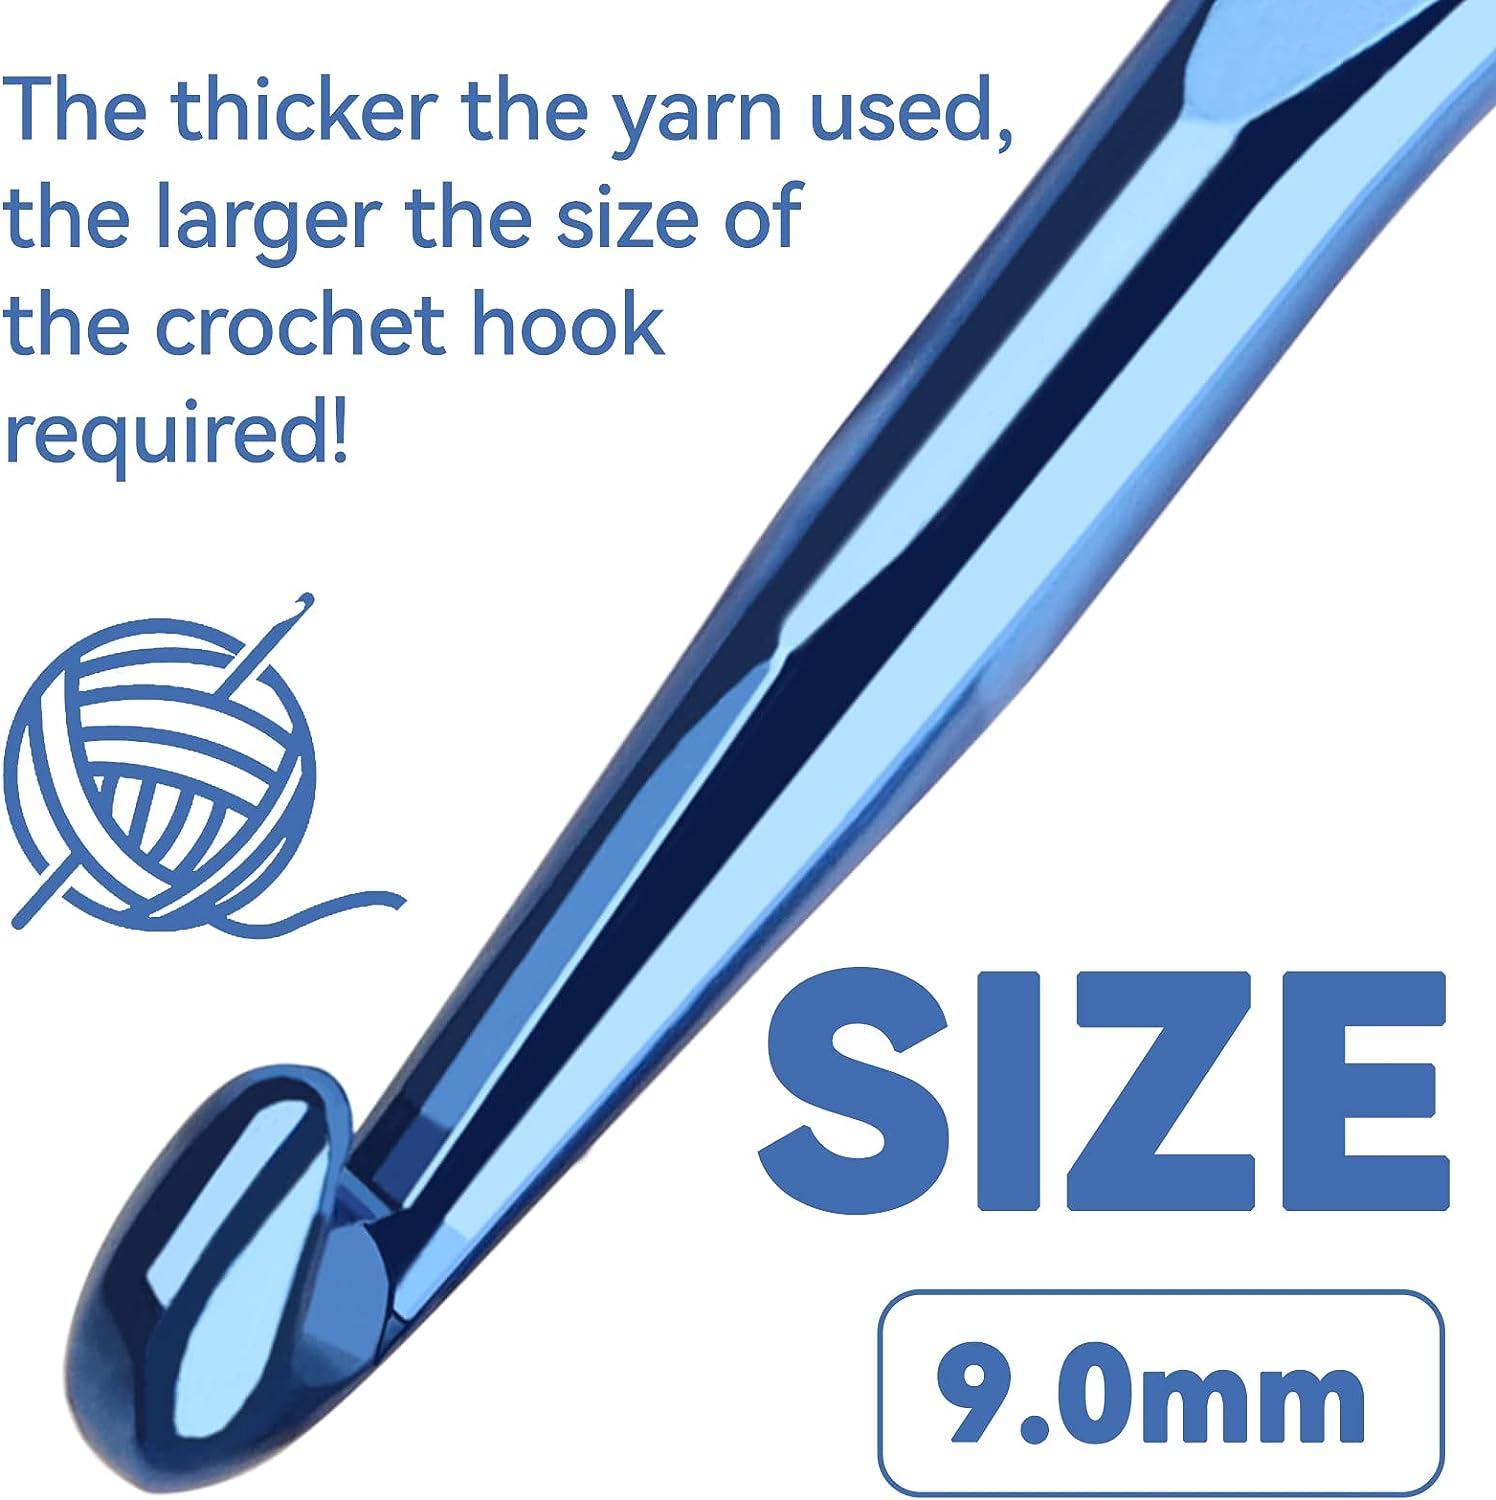 Coopay Large Crochet Hooks Single, 9mm Crochet Needle Part of Aluminum  Ergonomic Crochet Kit, Smooth and No Snagging Yarn - Ideal Knitting  Supplies (Ganchillos,Aguja de Tejer) (9.0mm) Bare Metal M/N-9.0mm